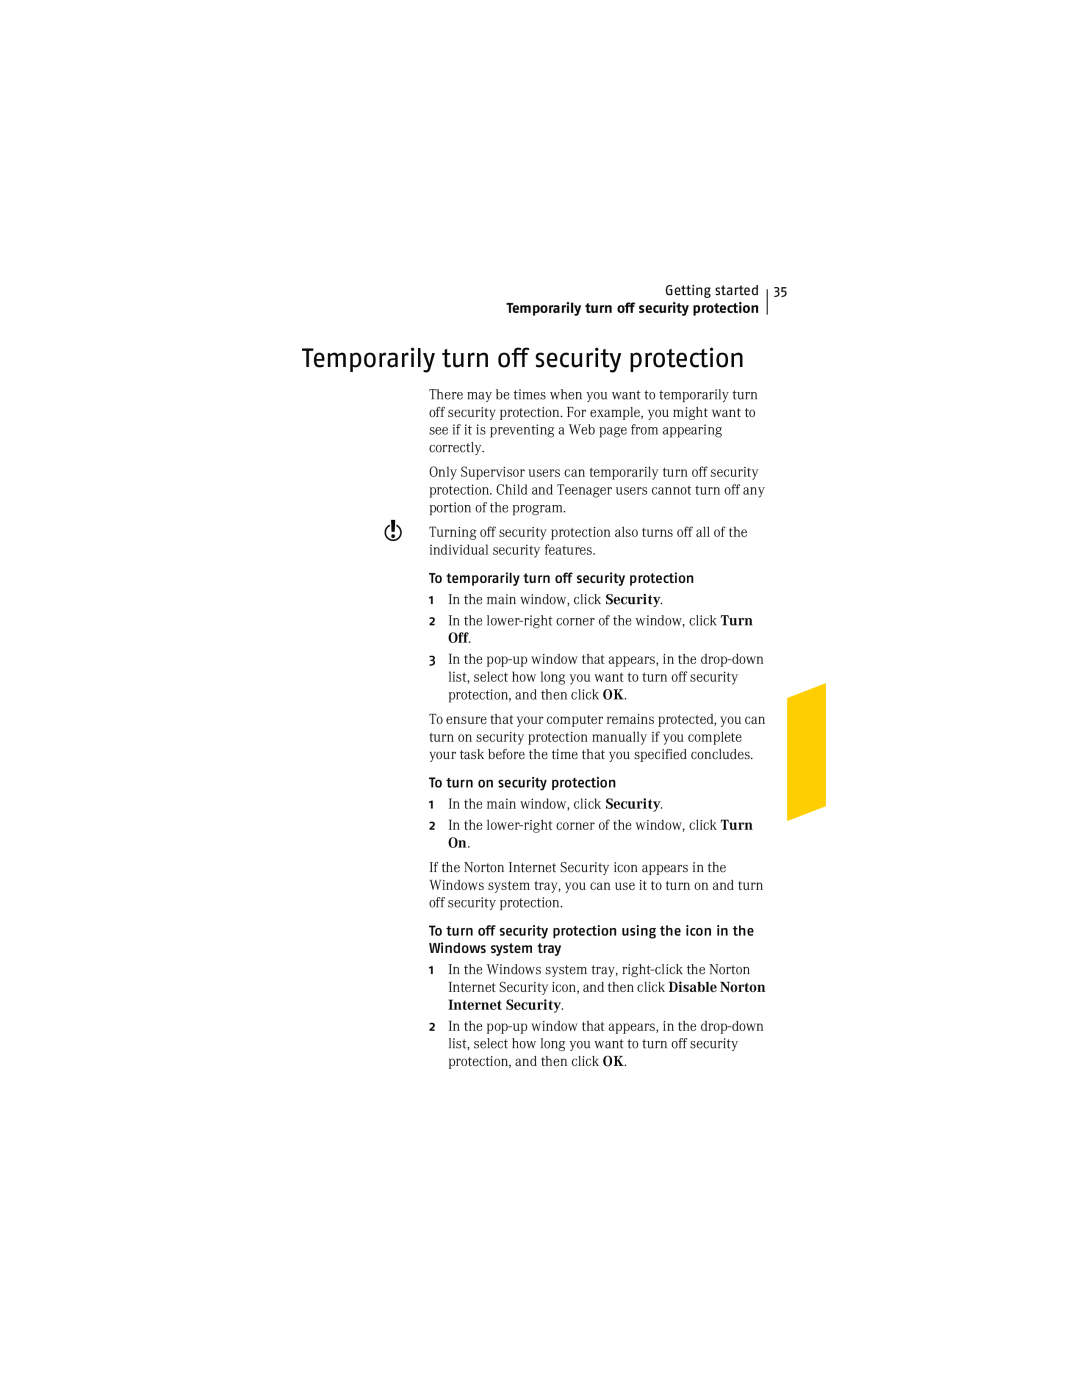 Symantec NIS2005 manual Temporarily turn off security protection 